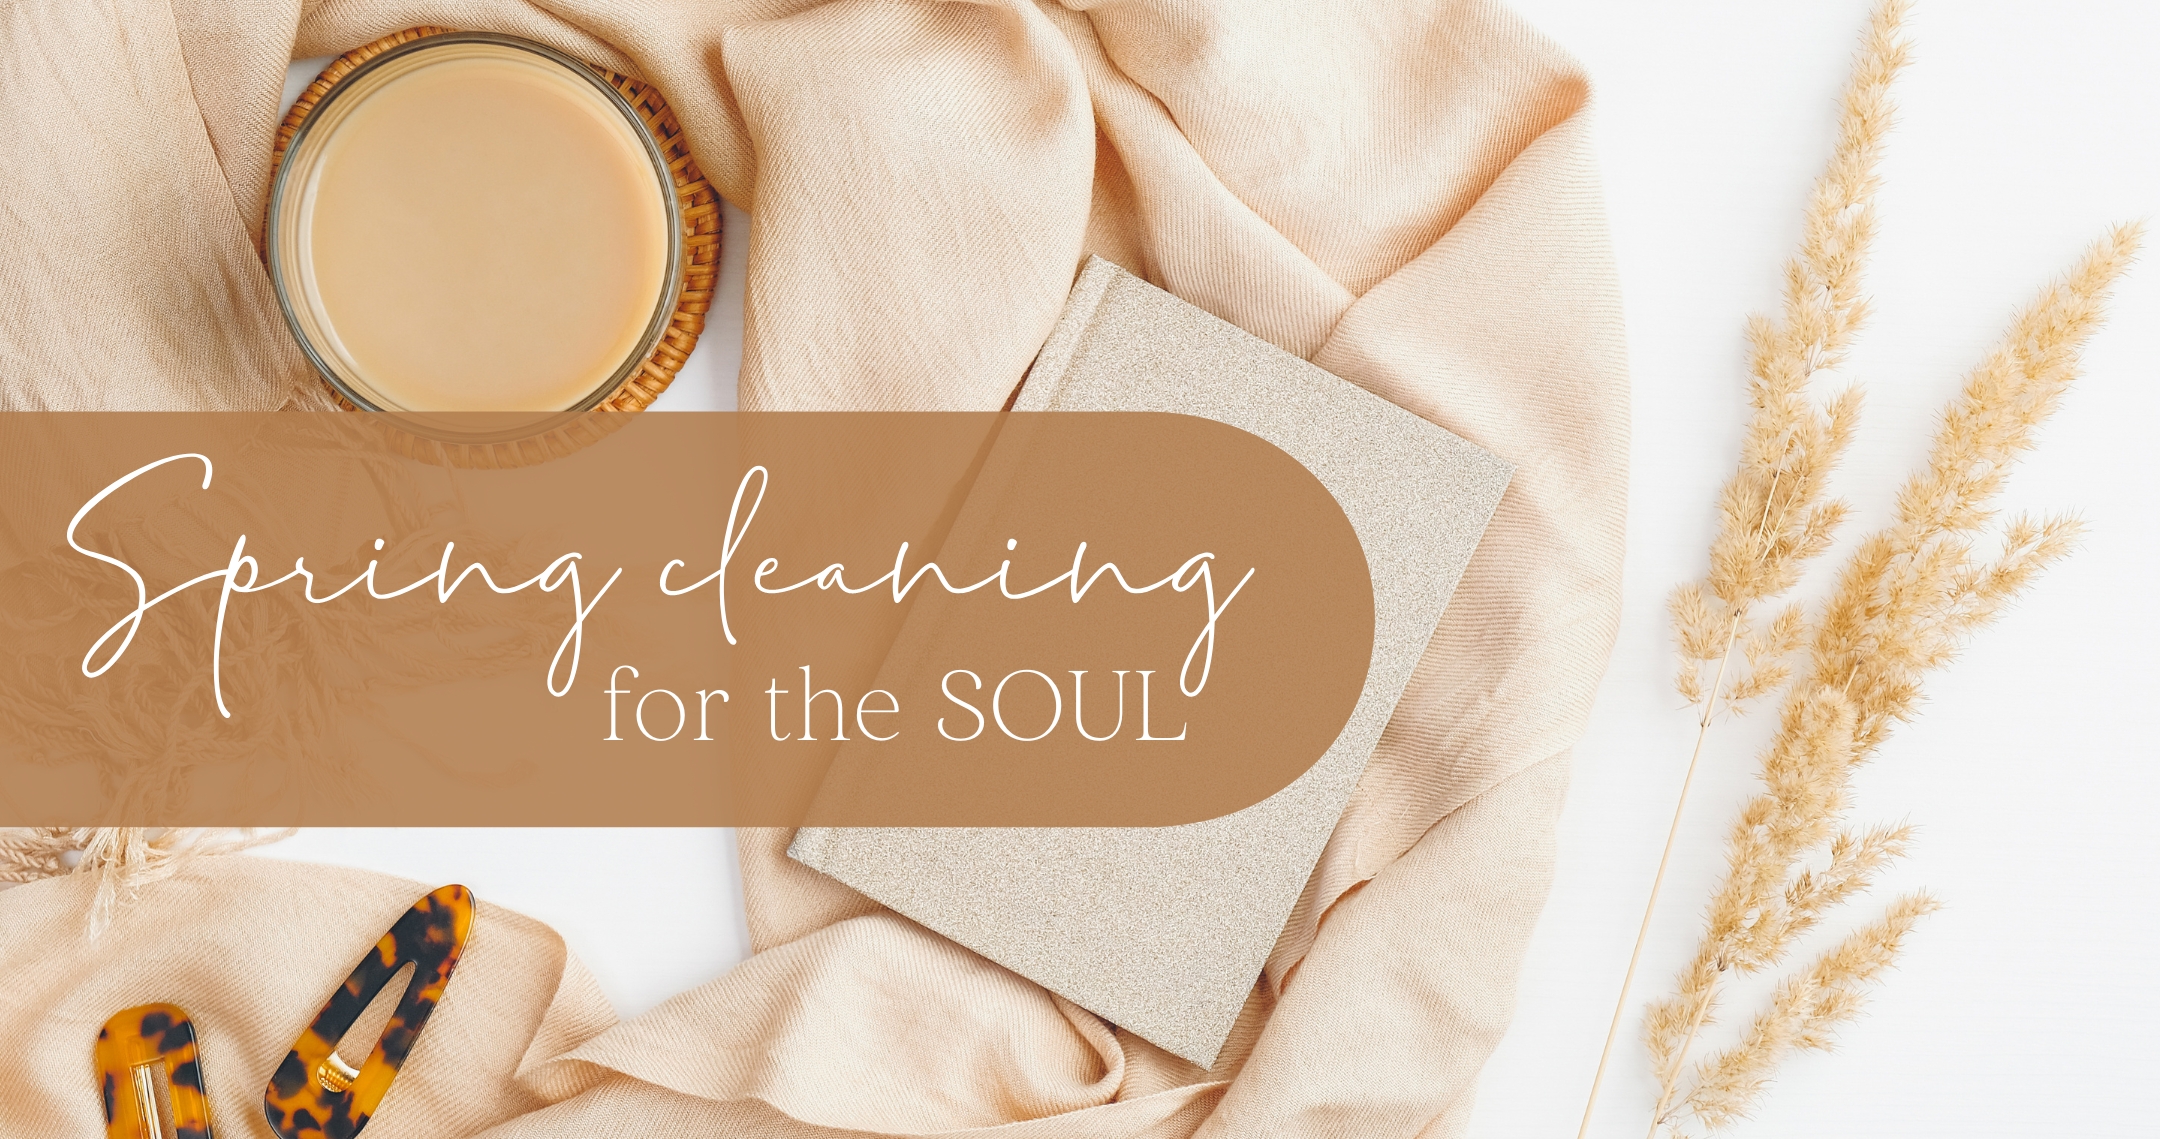 Refreshing Your Spirit: Spring Cleaning for the Soul